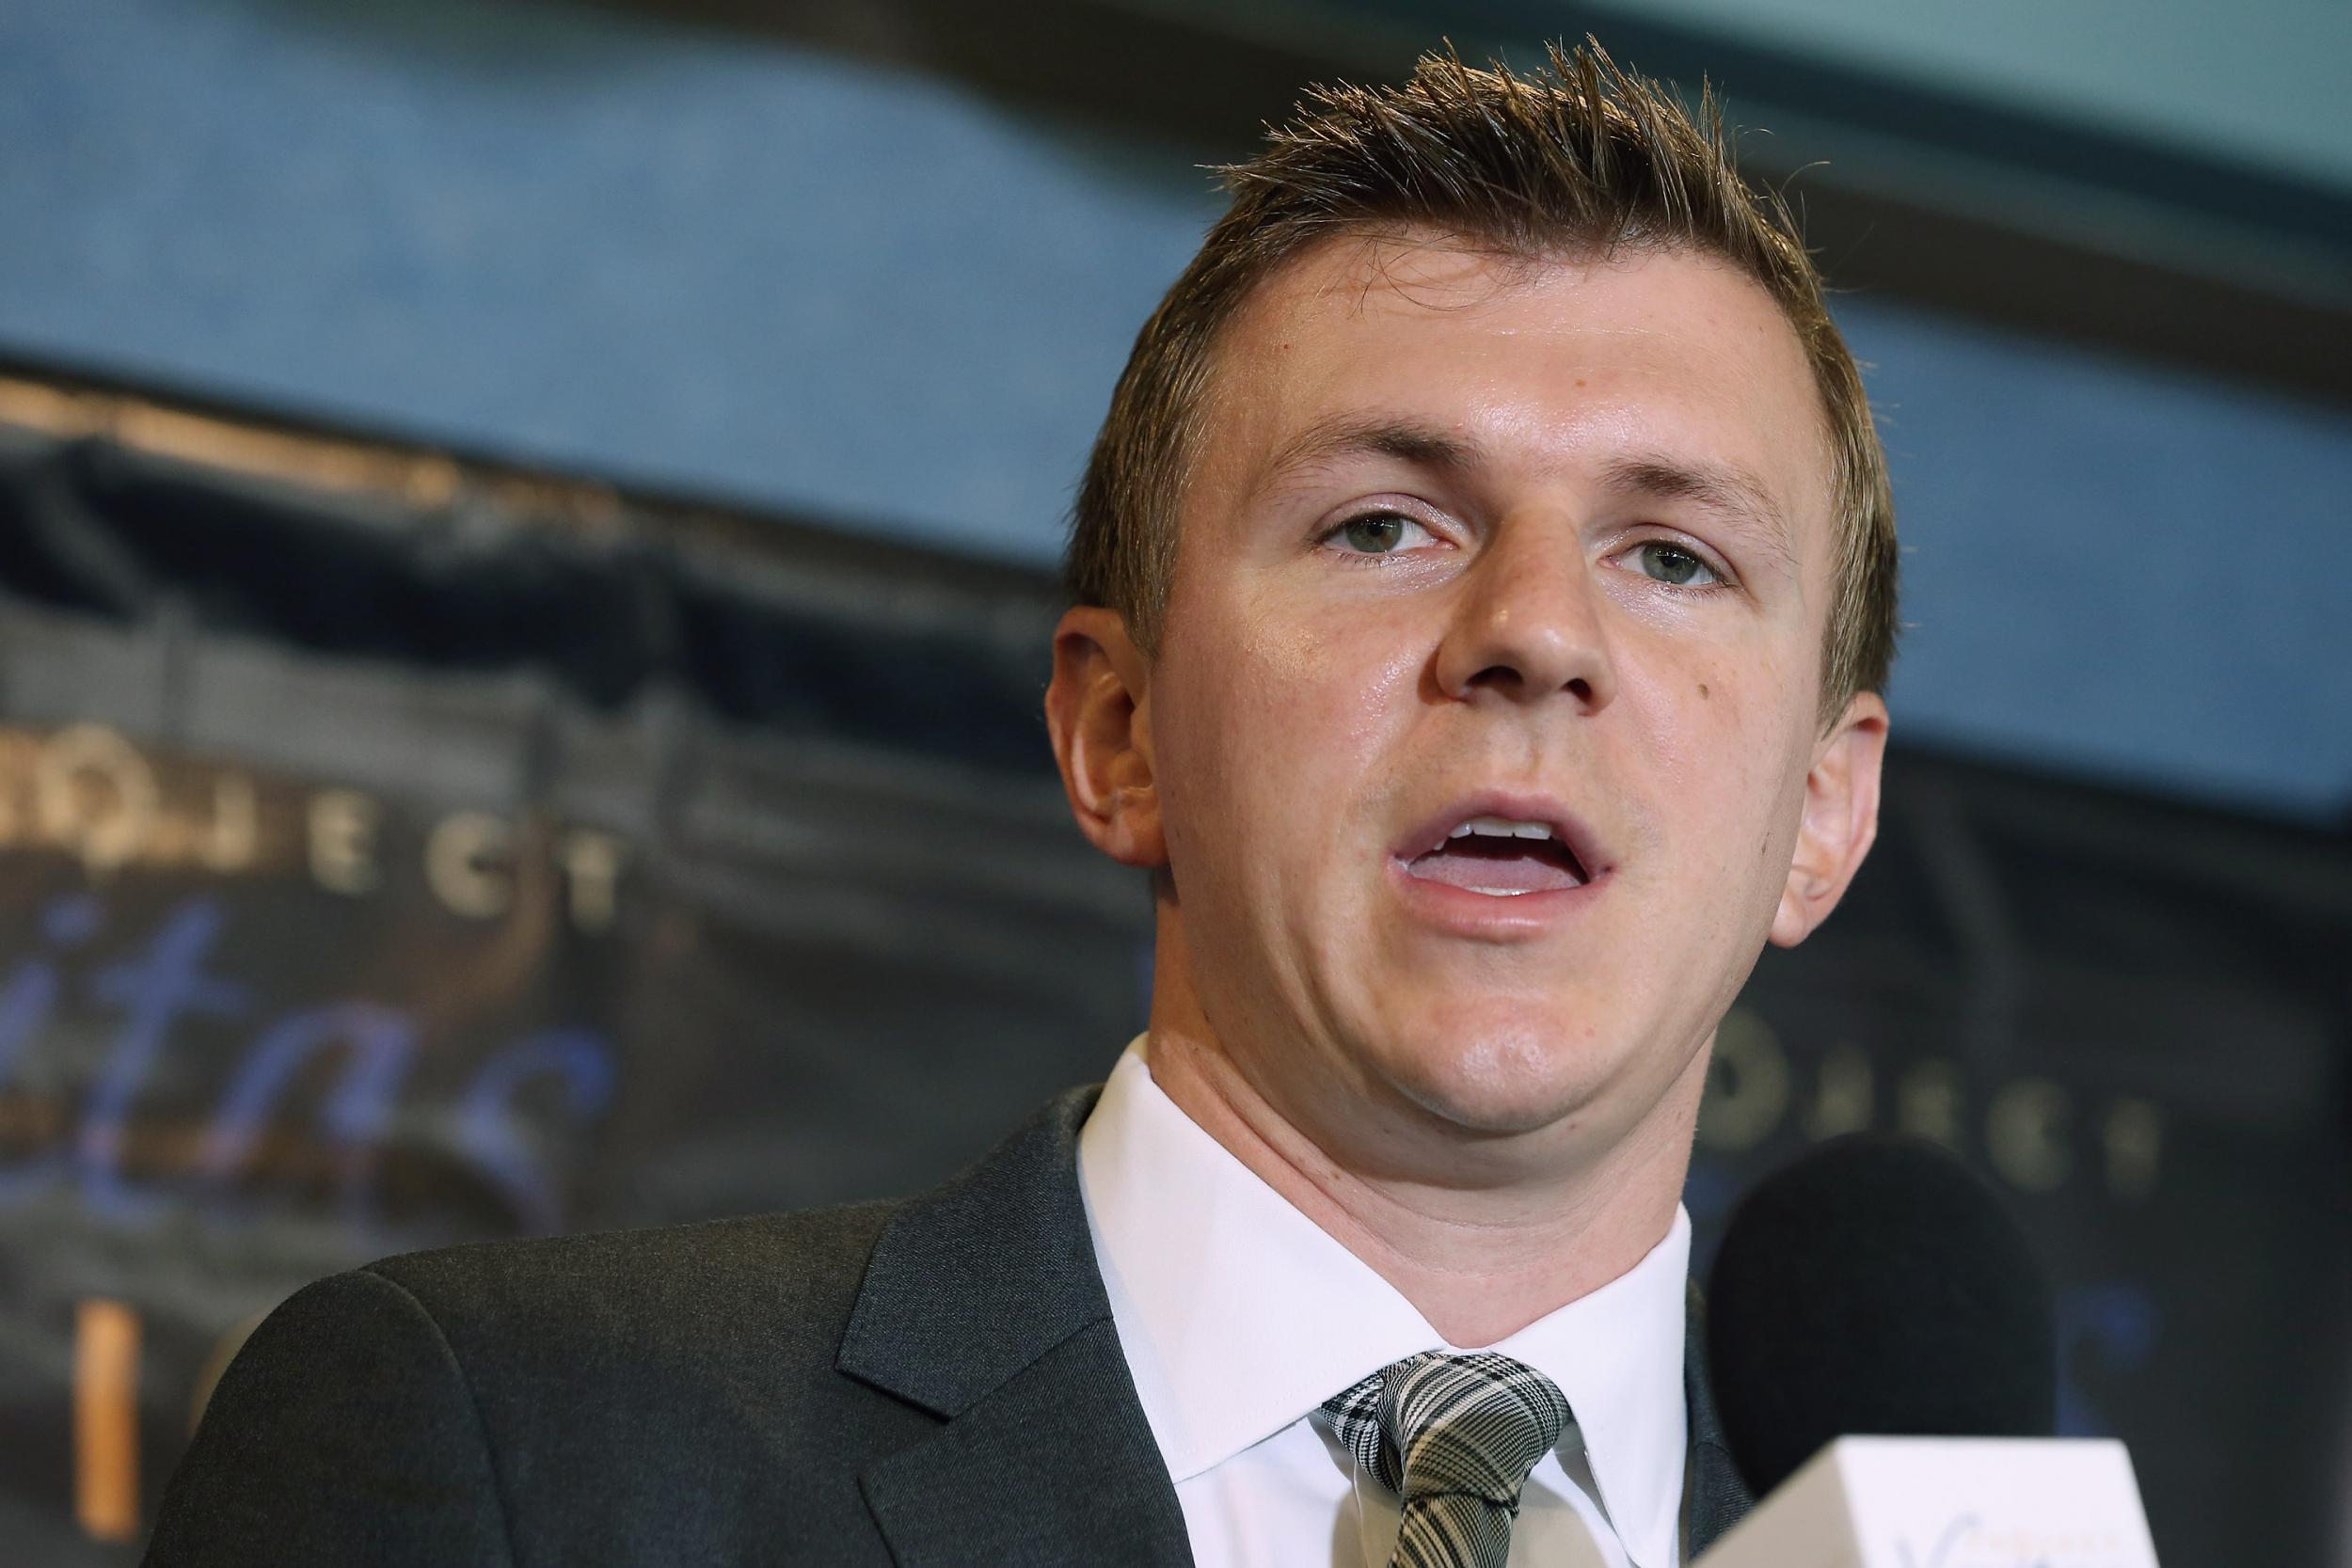 Conservative undercover journalist James O'Keefe holds a news conference at the National Press Club